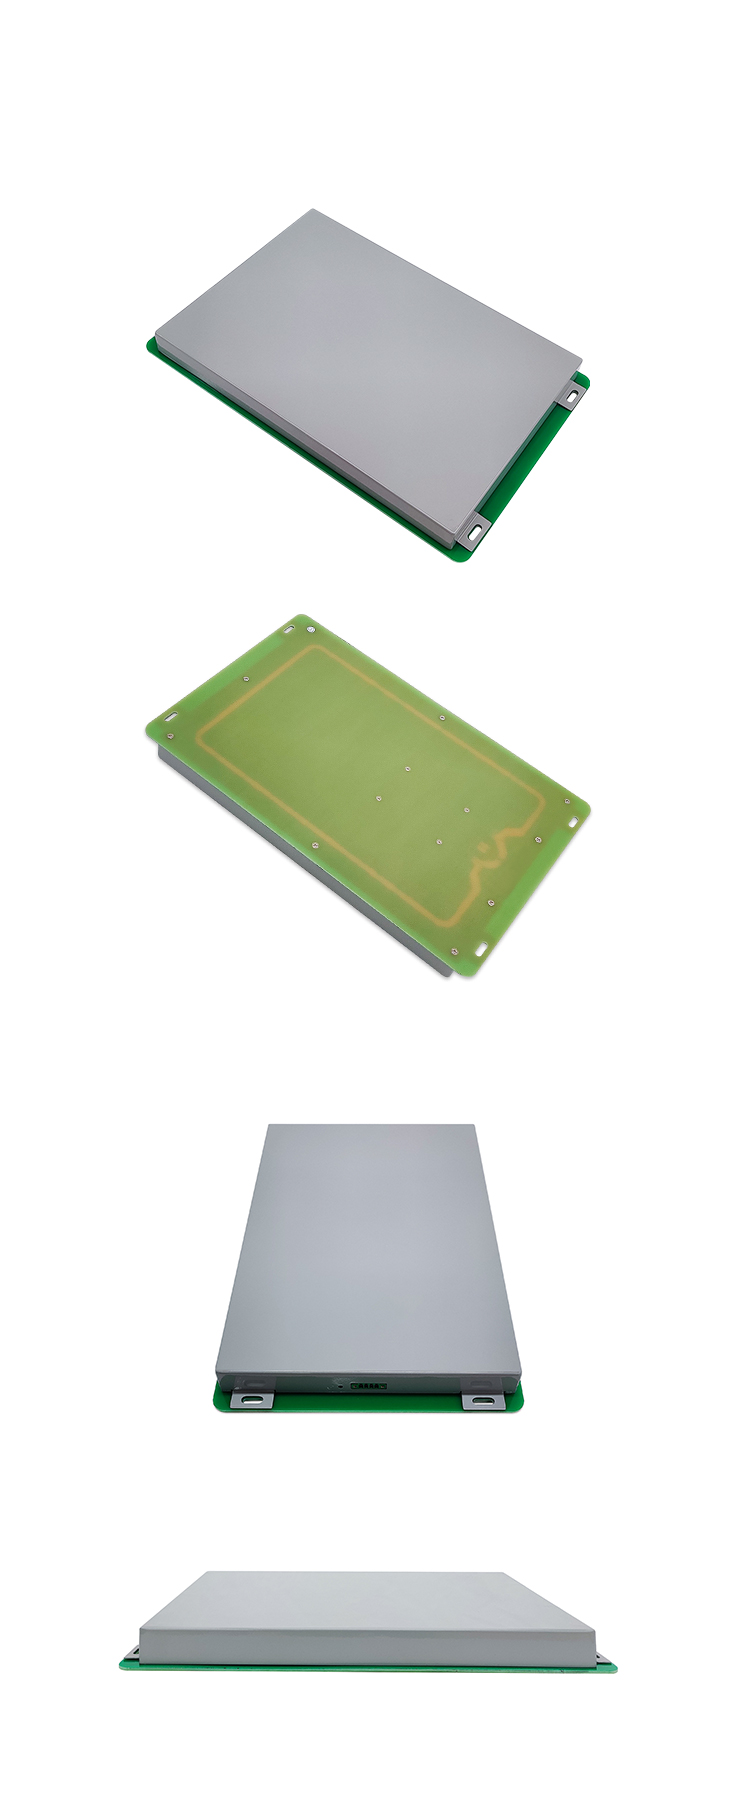 PCB And Metal Plate Housing RFID Tag Scanner , Embedded RFID Reader For Library Kiosk